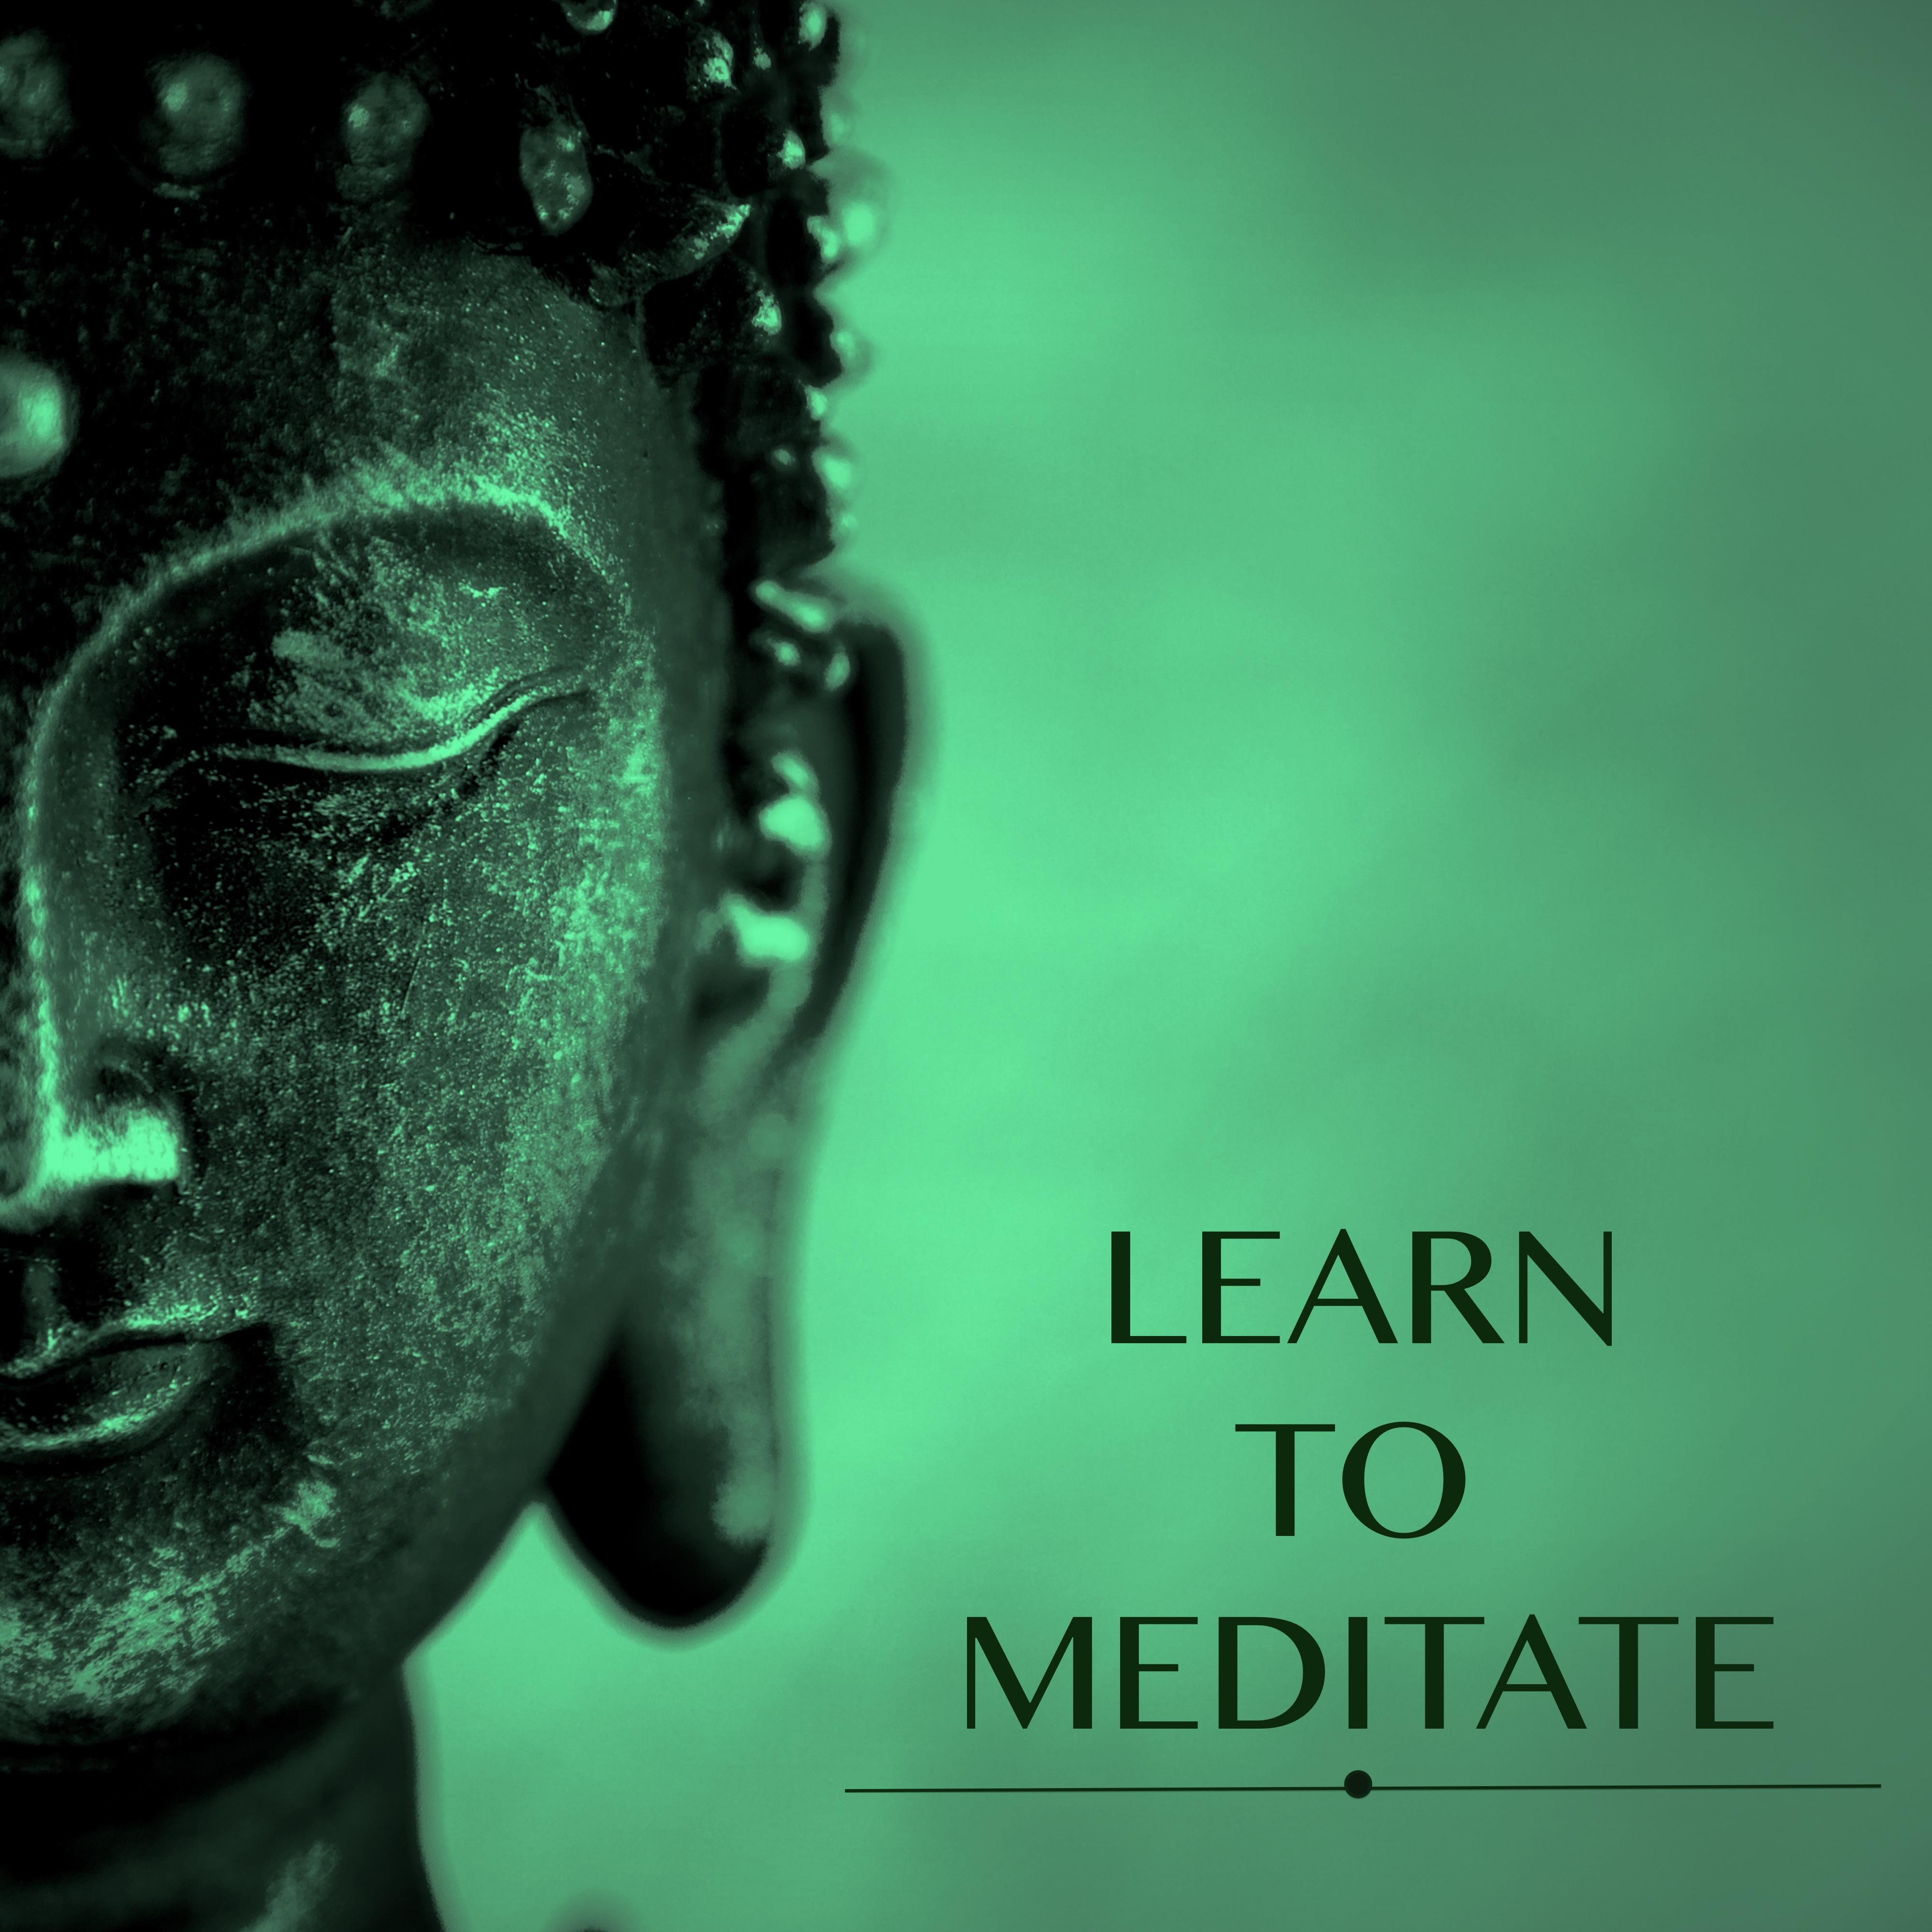 Learn to Meditate - Beautiful Soothing Music & Slow Relaxing New Age Songs to practice Guided Meditation Techniques for Beginners and Relaxation Bonus Track Version